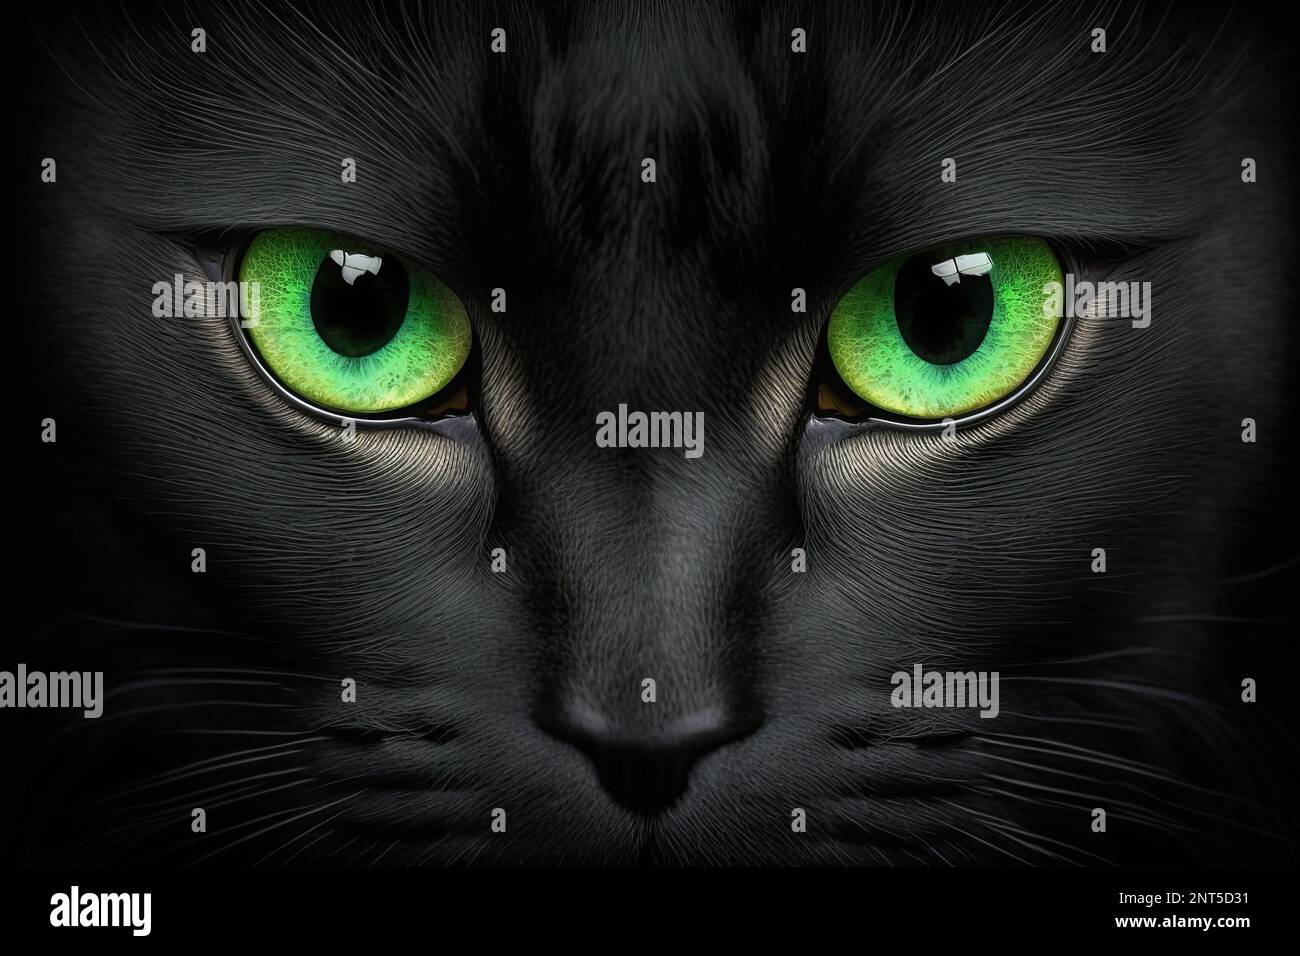 A frightful feline face appears up close against a dark backdrop, evoking a Halloween vibe and a spooky atmosphere. It seems like a panther with Stock Photo